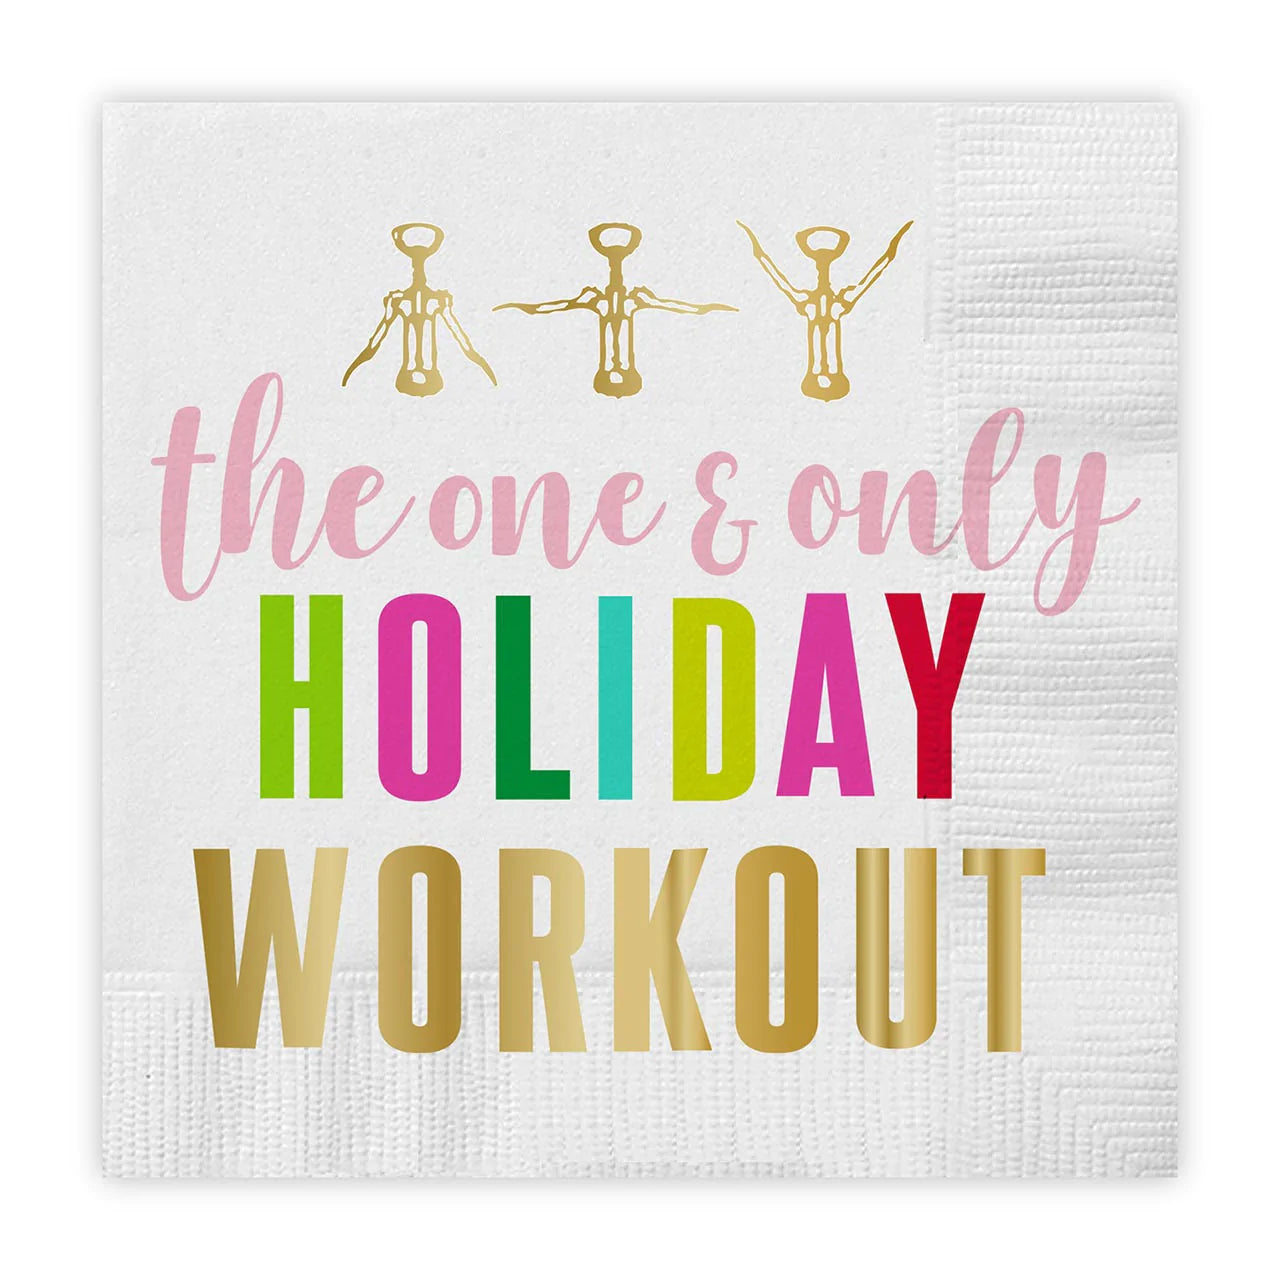 Funny "Wine Opener Holiday Workout" Christmas Cocktail Napkins